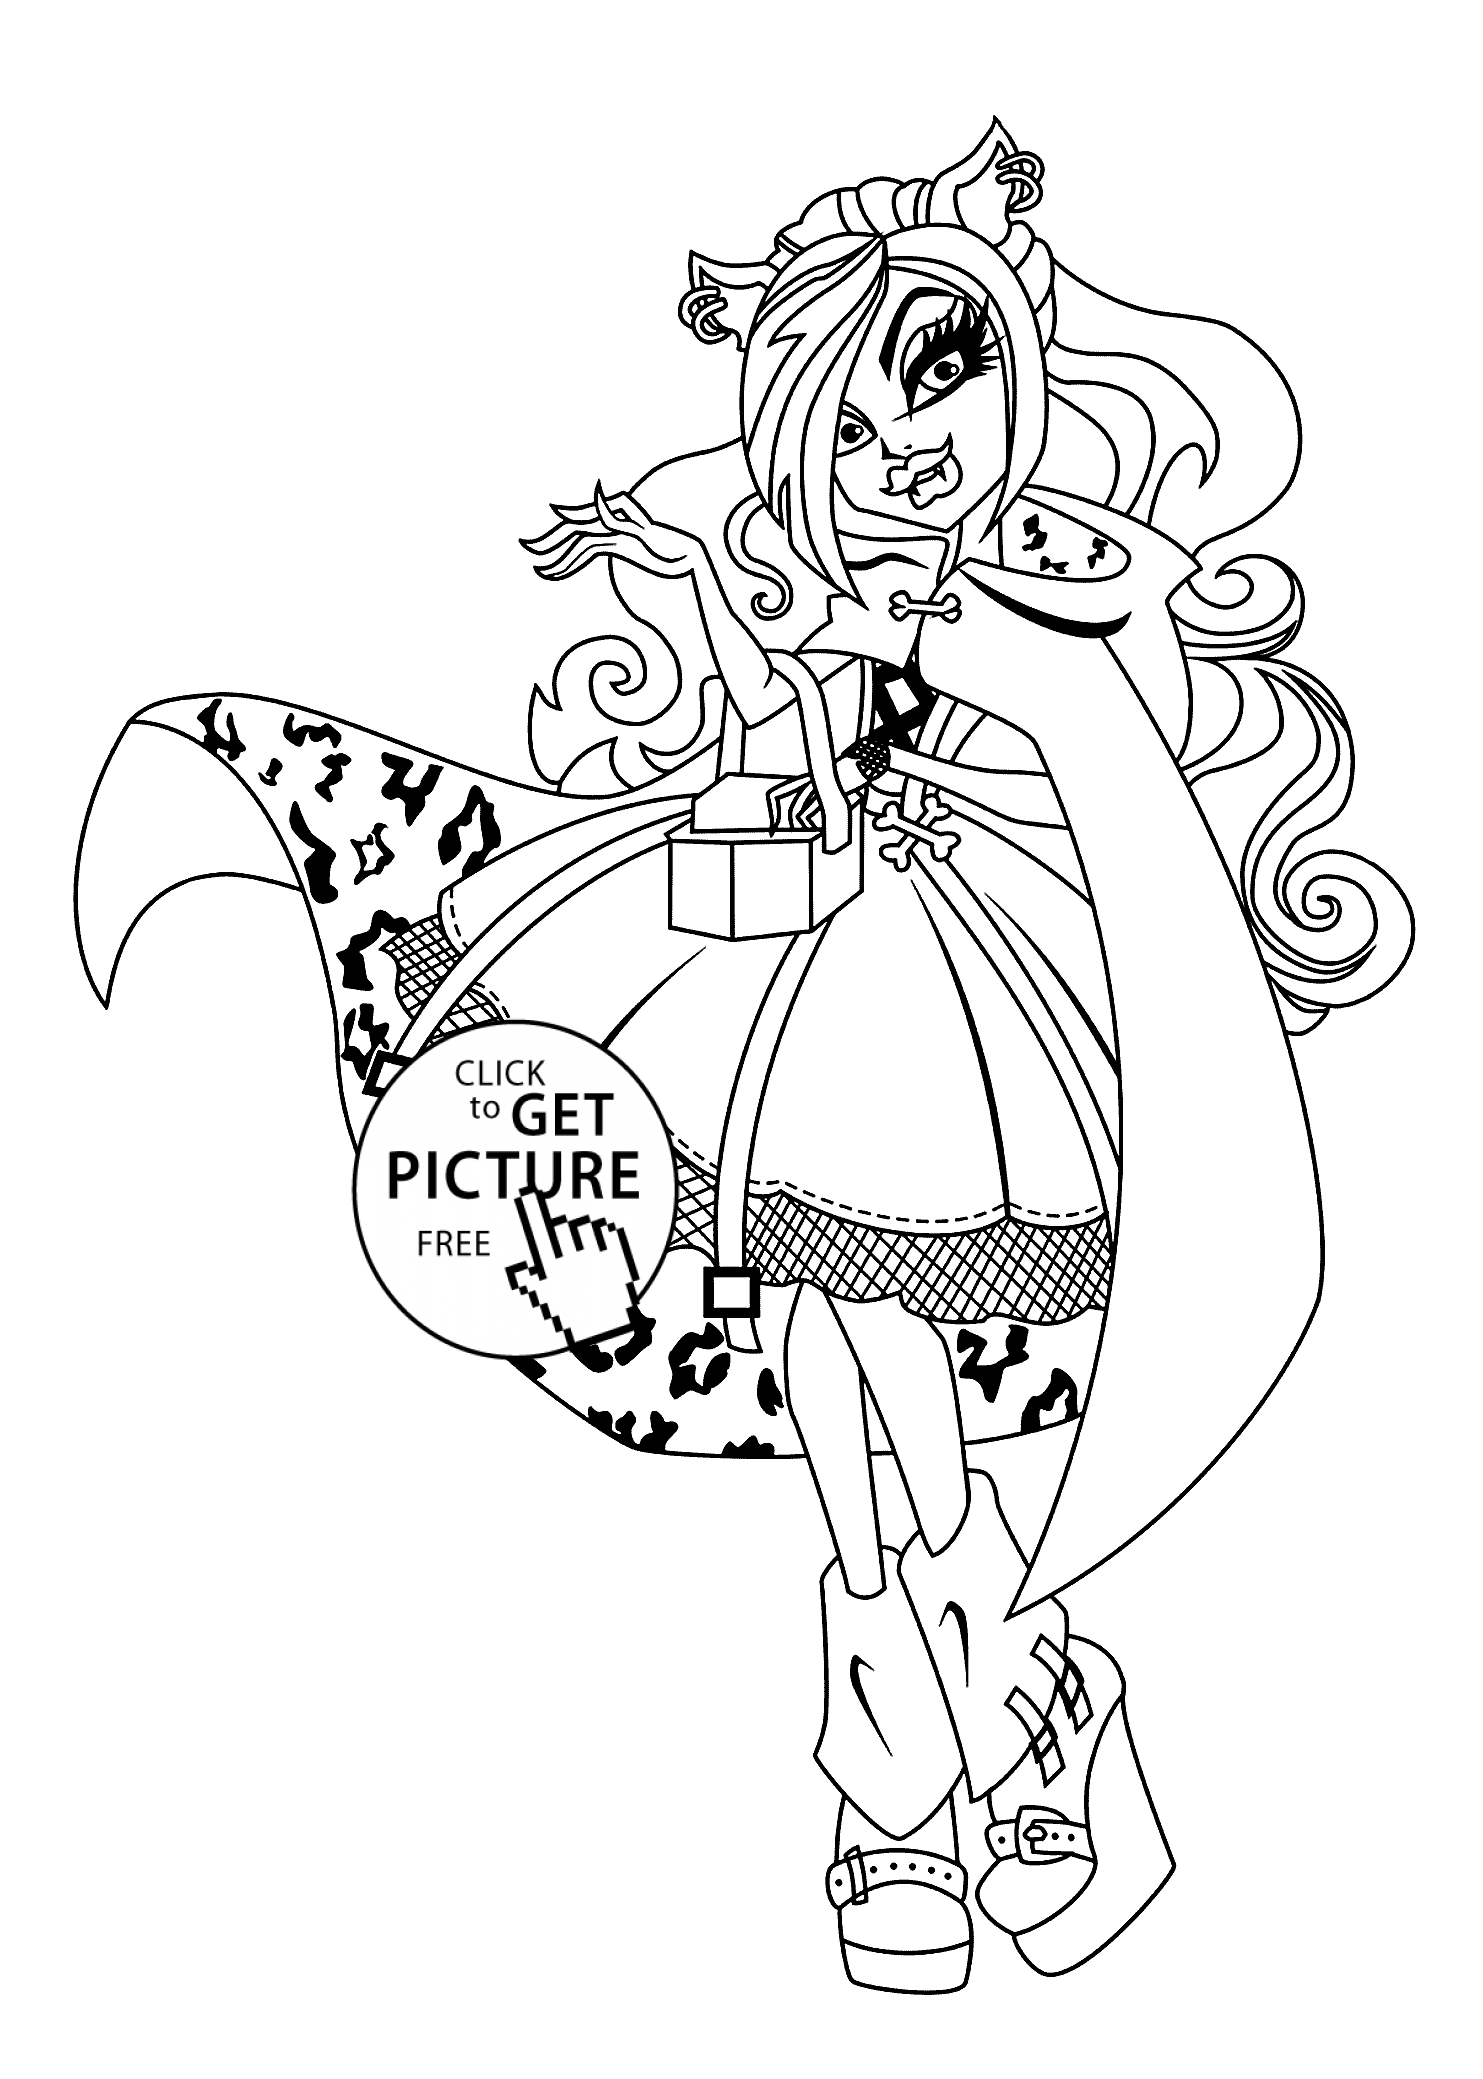 monster high coloring pages clawdeen wolf clawdeen wolf coloring pages coloring pages to download pages high wolf coloring clawdeen monster 